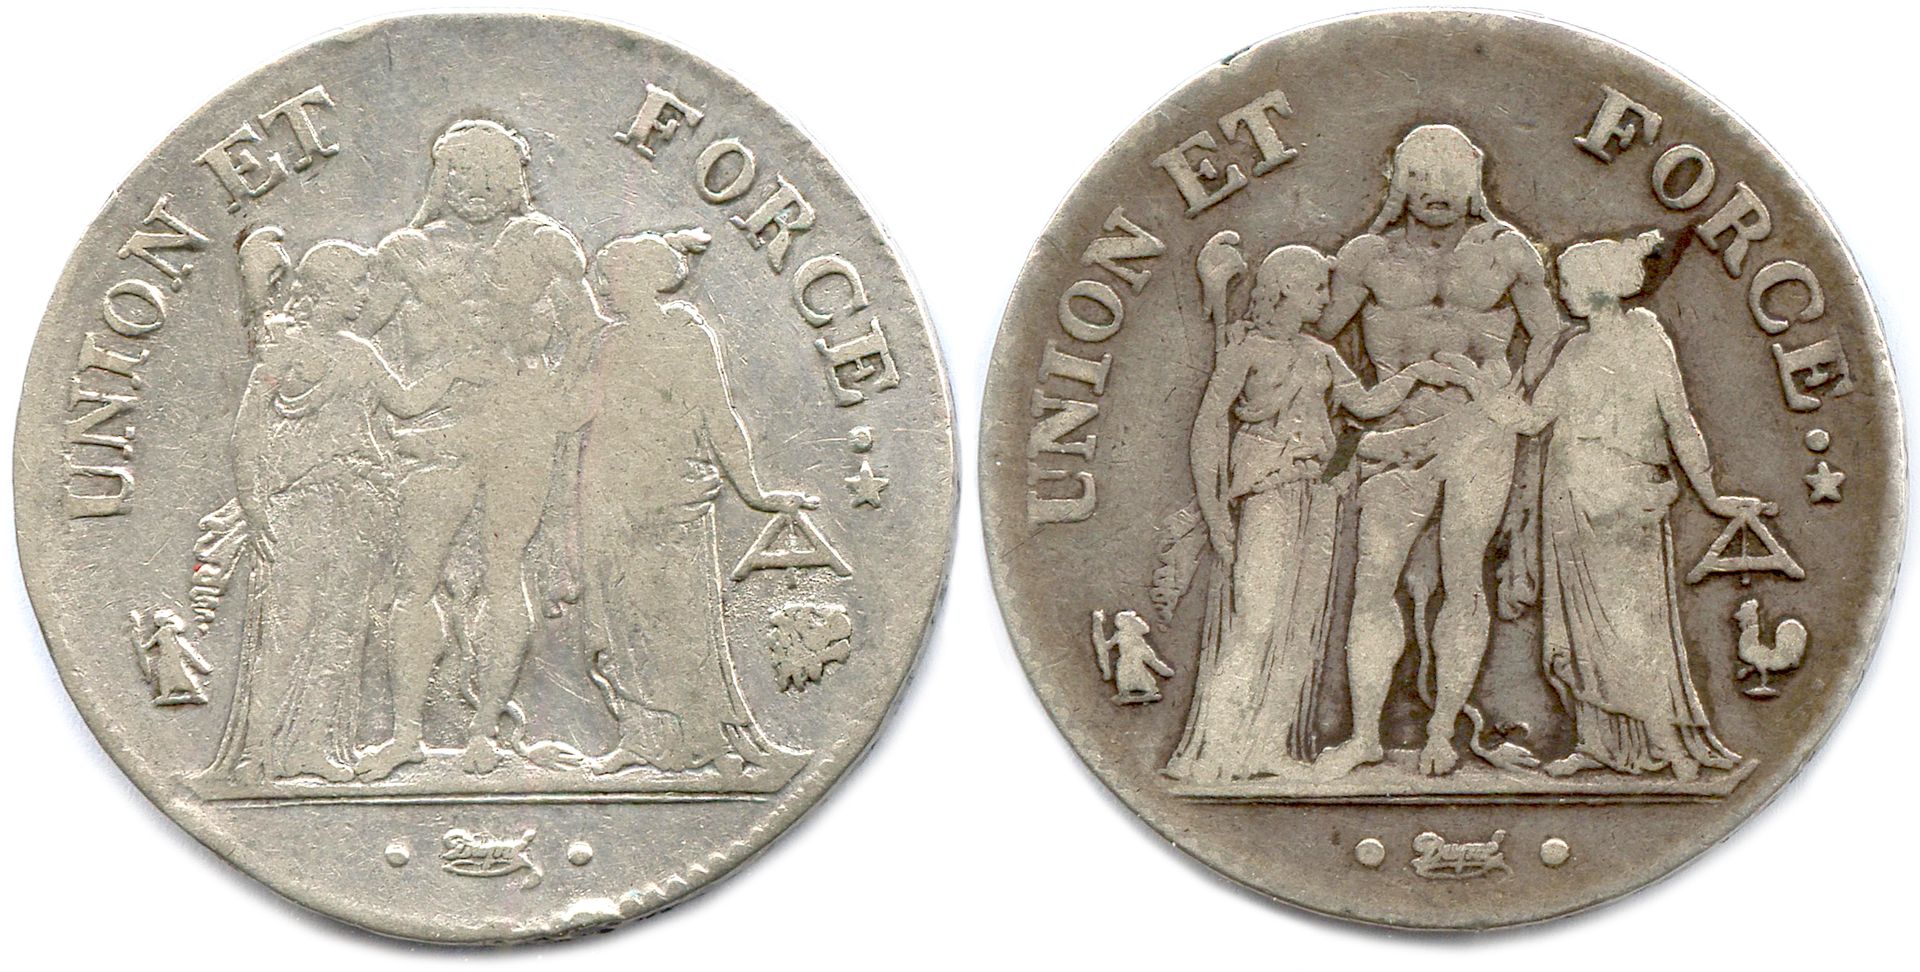 Null DIRECTORY 23 October 1795 - 10 November 1799

Two coins : 5 Francs Hercules&hellip;